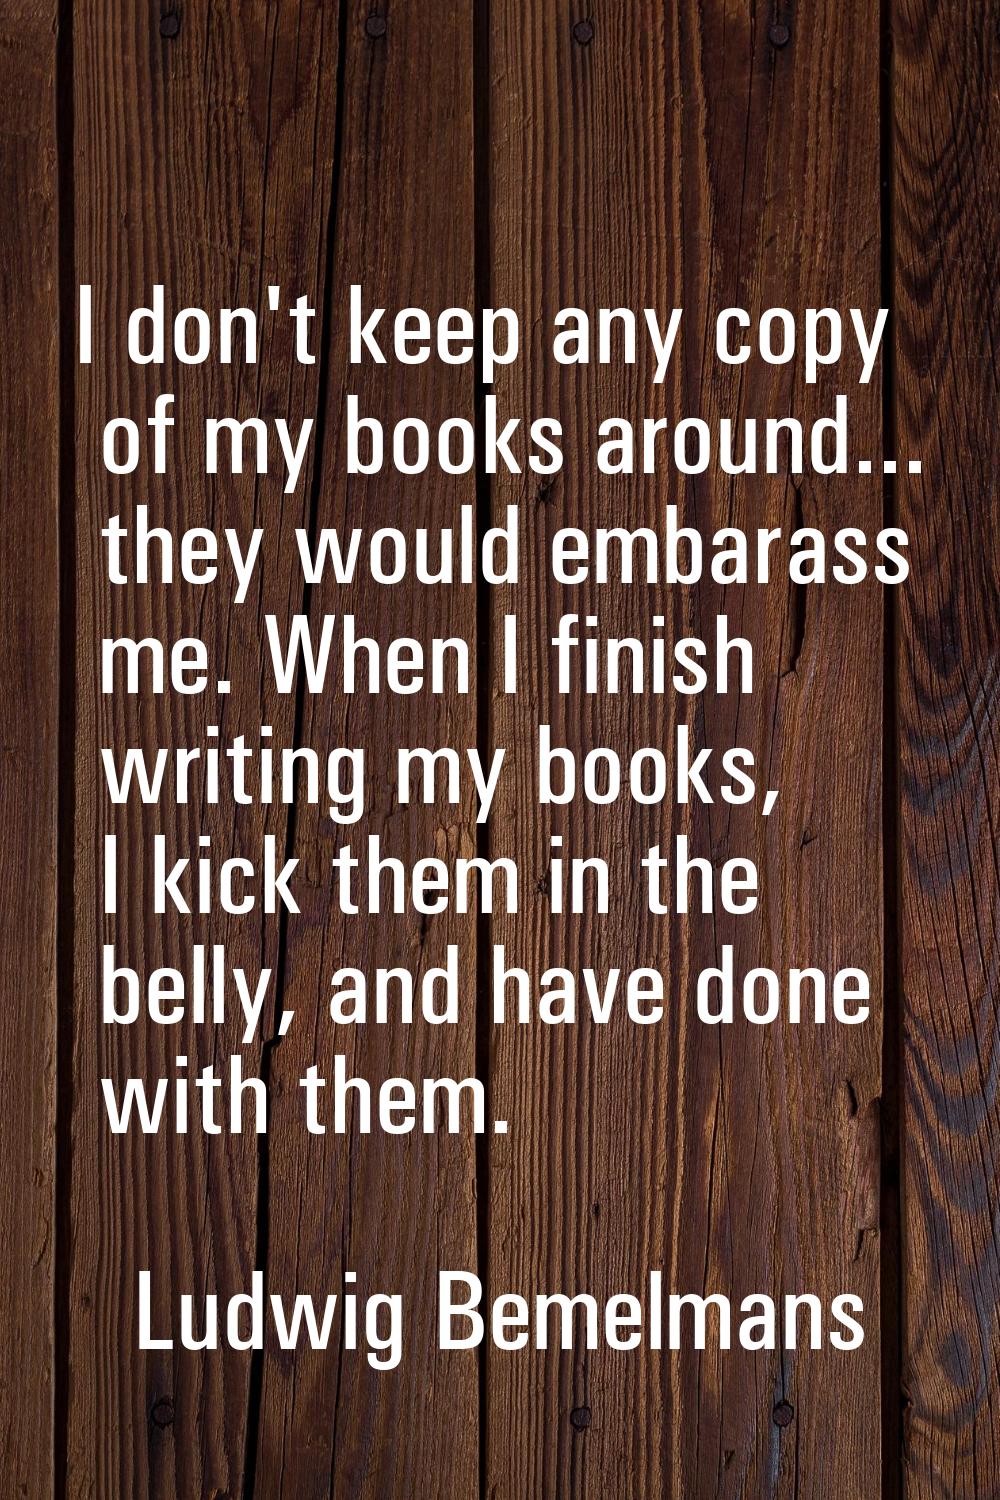 I don't keep any copy of my books around... they would embarass me. When I finish writing my books,